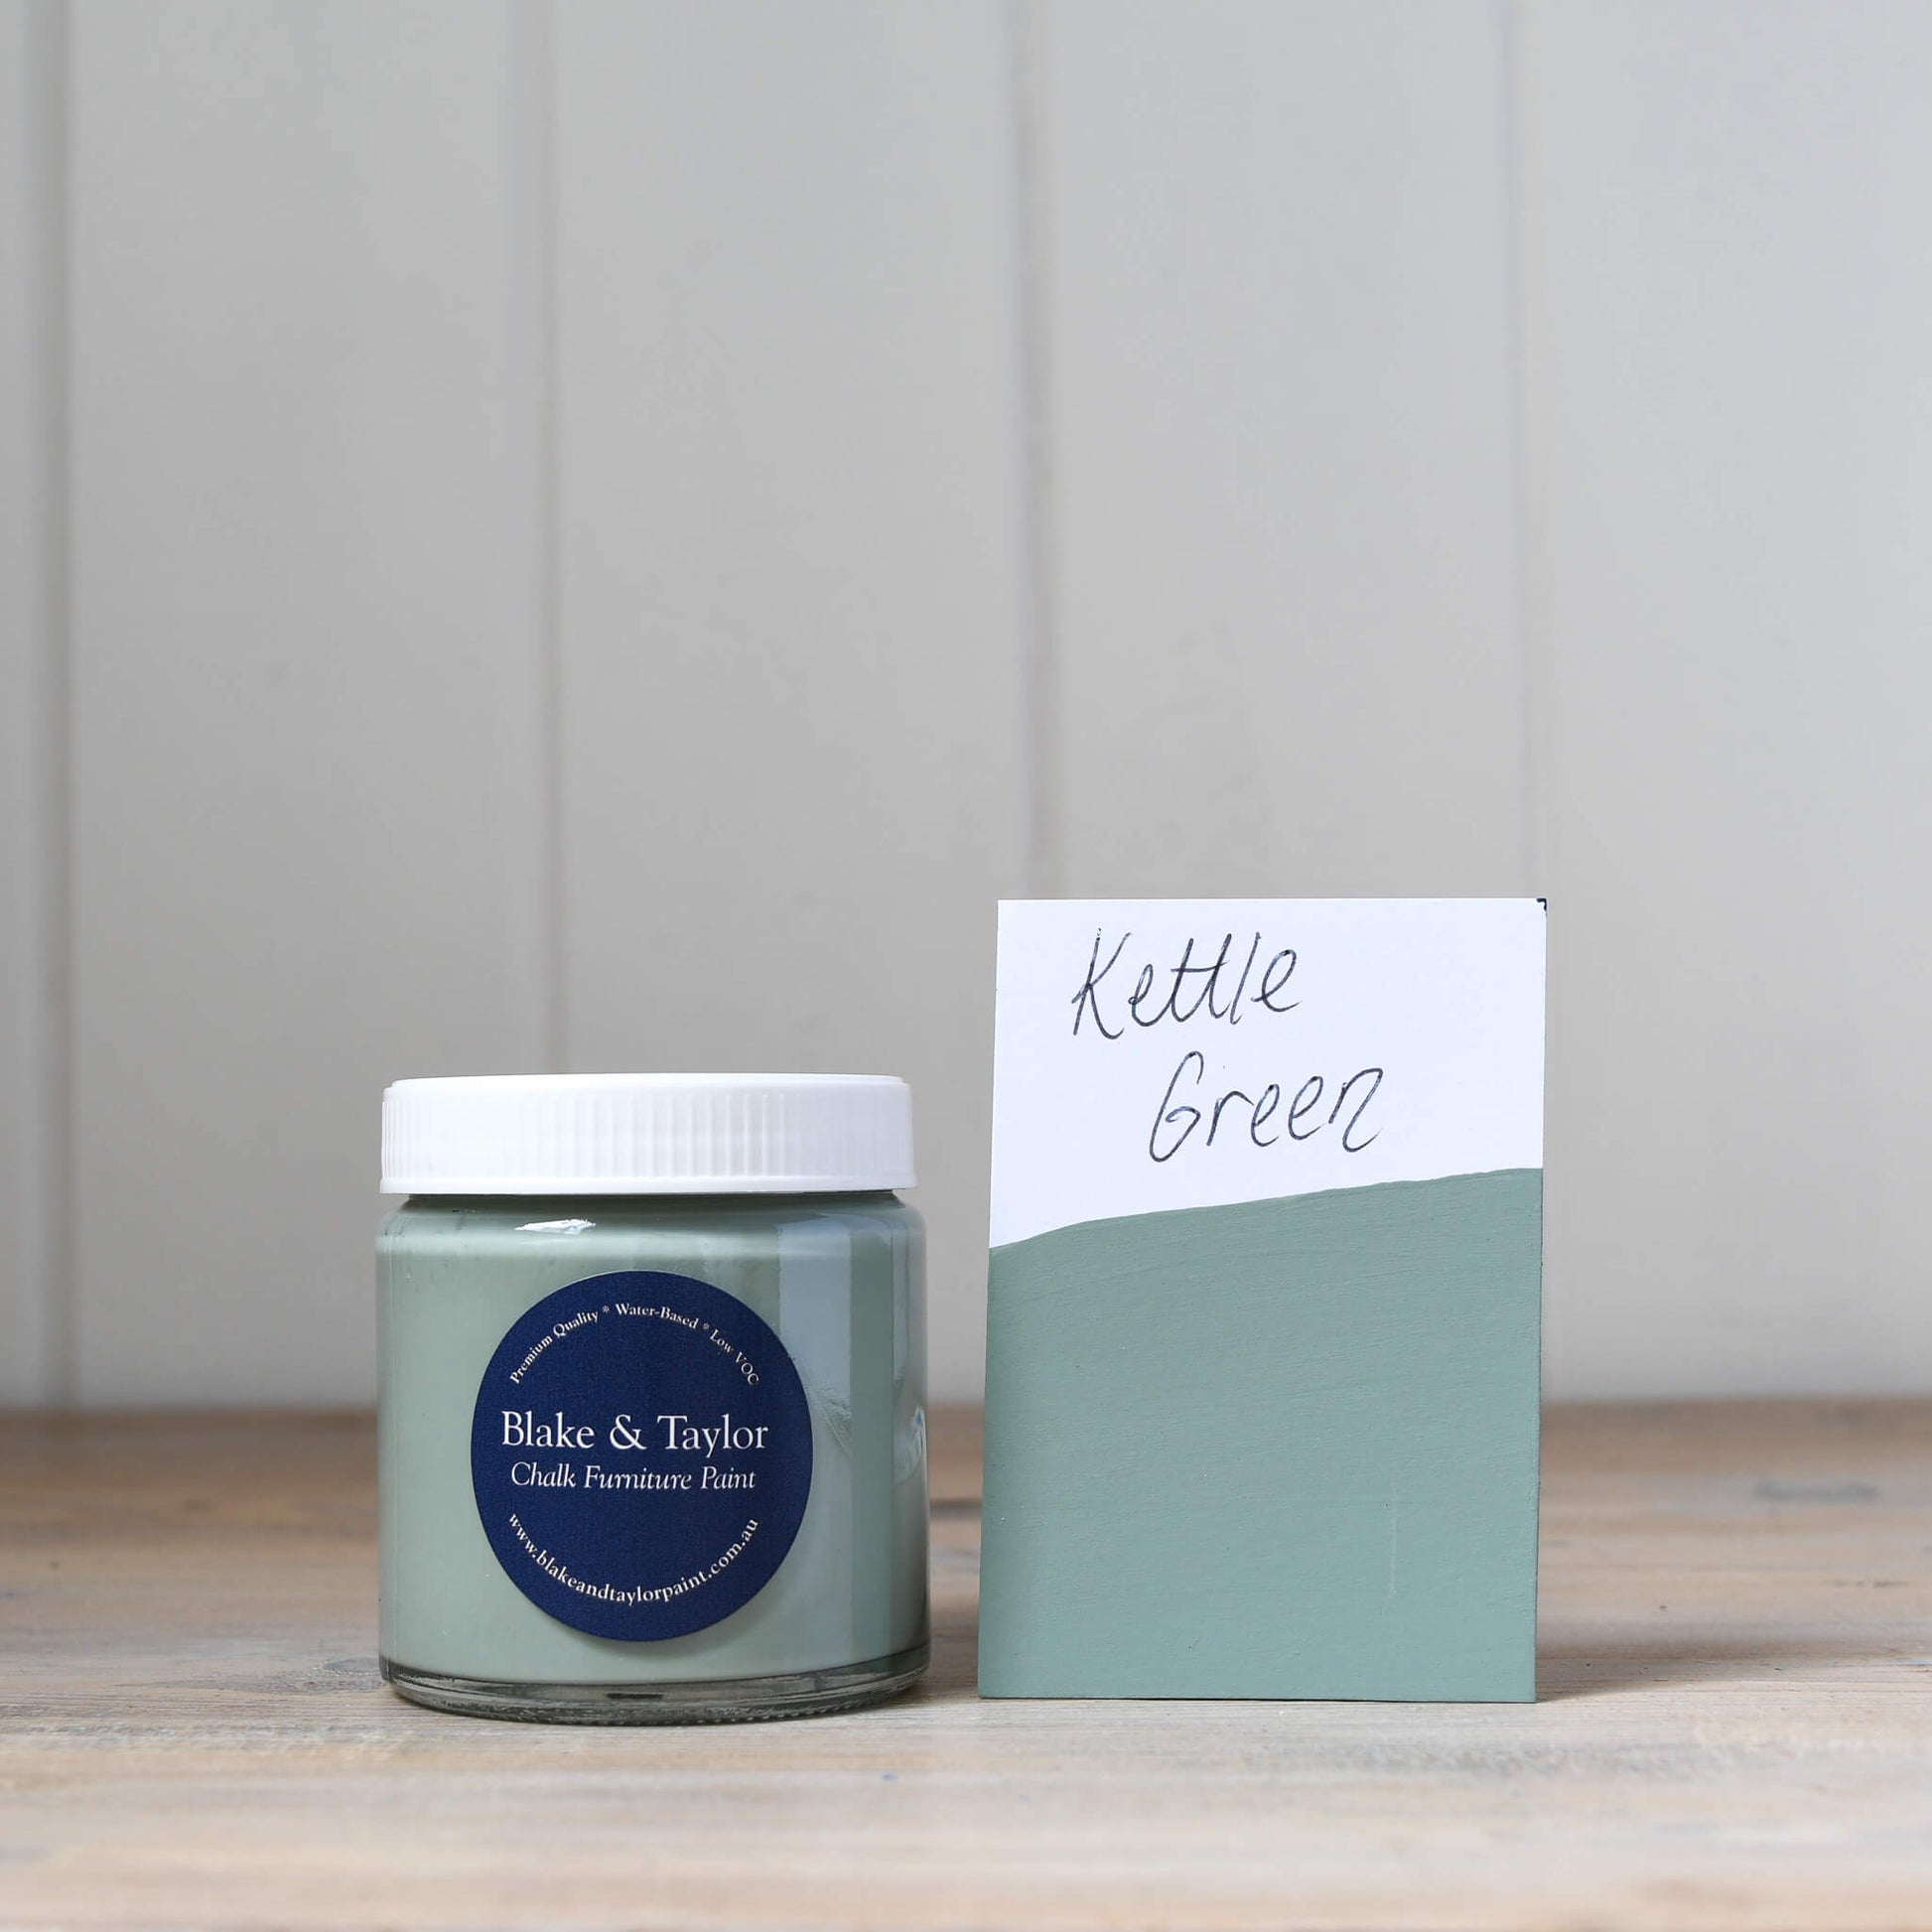 120ml pot of Kettle Green Blake & Taylor Chalk Furniture Paint and matching swatch